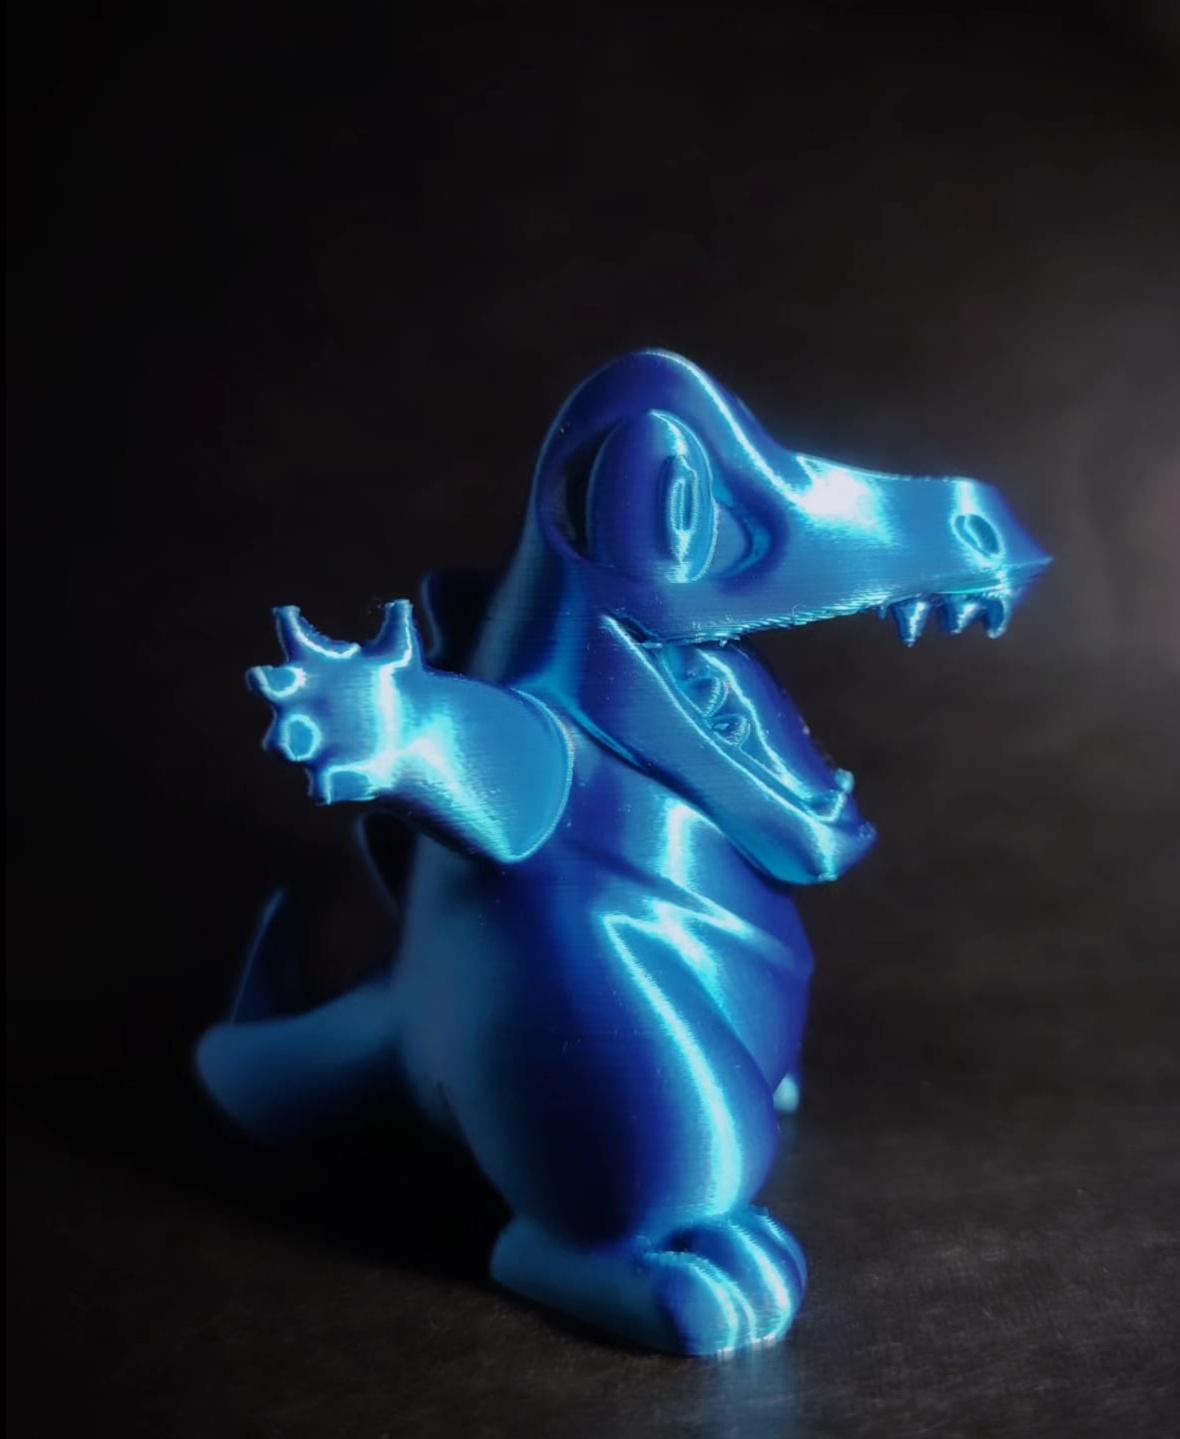 Totodile  - Awesome model!

Check my insta page @3Doodling for more makes! ;) - 3d model